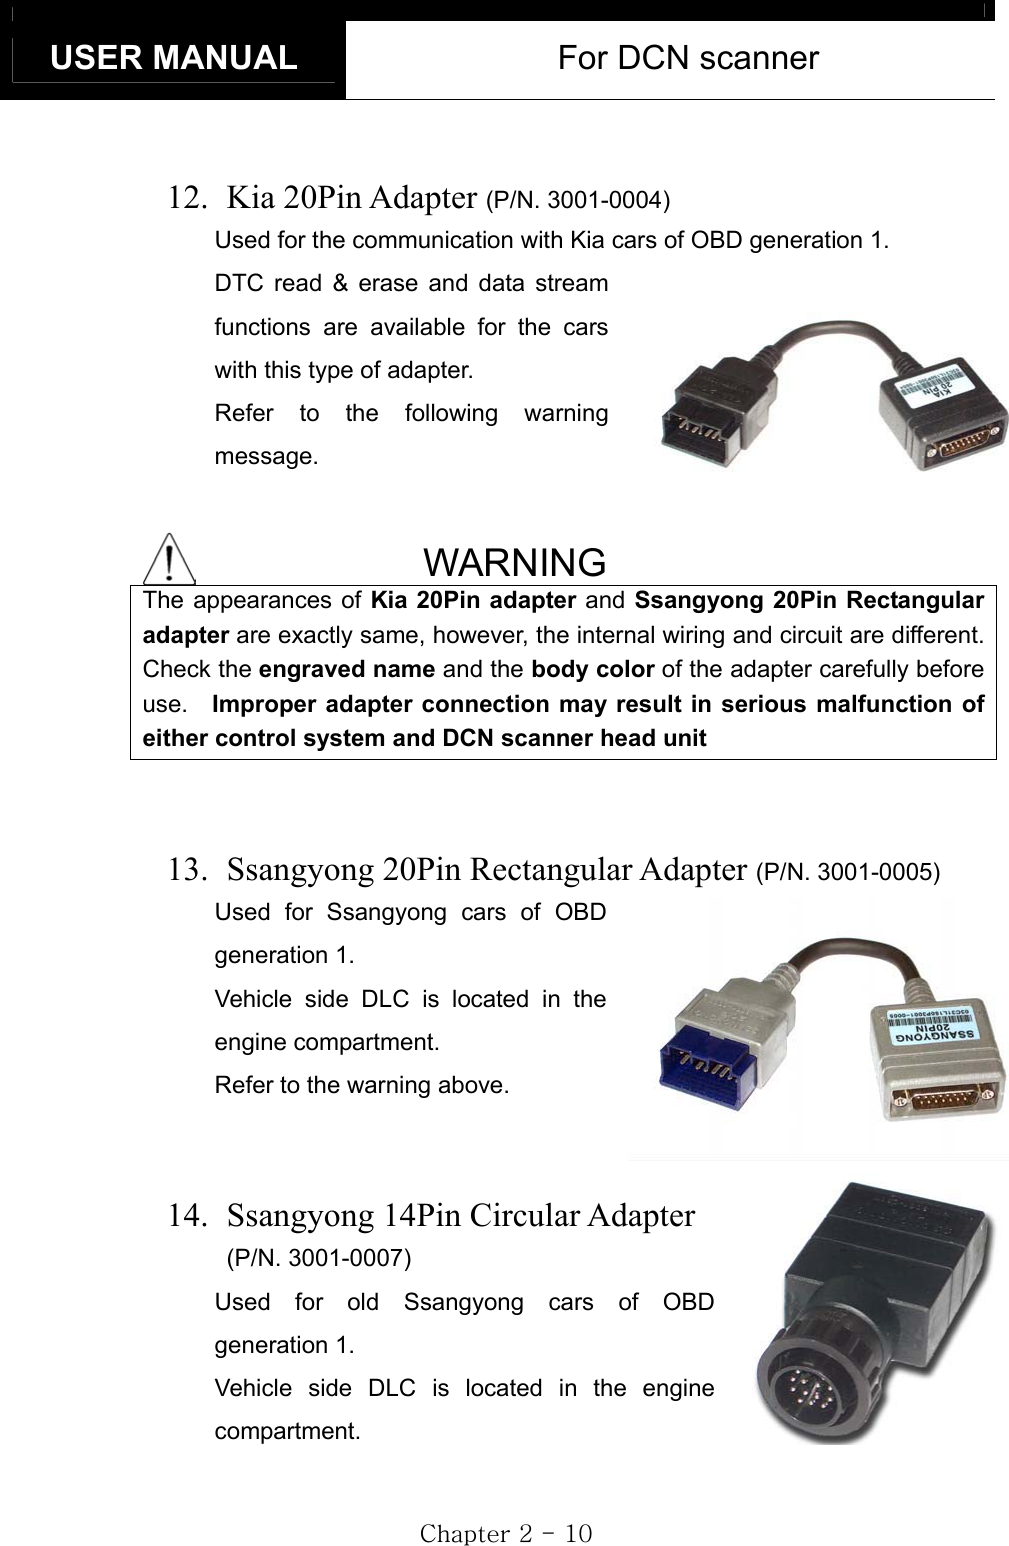 USER MANUAL  For DCN scanner GjGYGTGXWG     12.   Kia  20Pin  Adapter  (P/N. 3001-0004)Used for the communication with Kia cars of OBD generation 1.   DTC read &amp; erase and data stream functions are available for the cars with this type of adapter. Refer to the following warning message. WARNING The appearances of Kia 20Pin adapter and Ssangyong 20Pin Rectangular adapter are exactly same, however, the internal wiring and circuit are different. Check the engraved name and the body color of the adapter carefully before use.  Improper adapter connection may result in serious malfunction of either control system and DCN scanner head unit13.   Ssangyong 20Pin Rectangular Adapter (P/N. 3001-0005)Used for Ssangyong cars of OBD generation 1. Vehicle side DLC is located in the engine compartment. Refer to the warning above. 14.   Ssangyong 14Pin Circular Adapter (P/N. 3001-0007)Used for old Ssangyong cars of OBD generation 1. Vehicle side DLC is located in the engine compartment. 